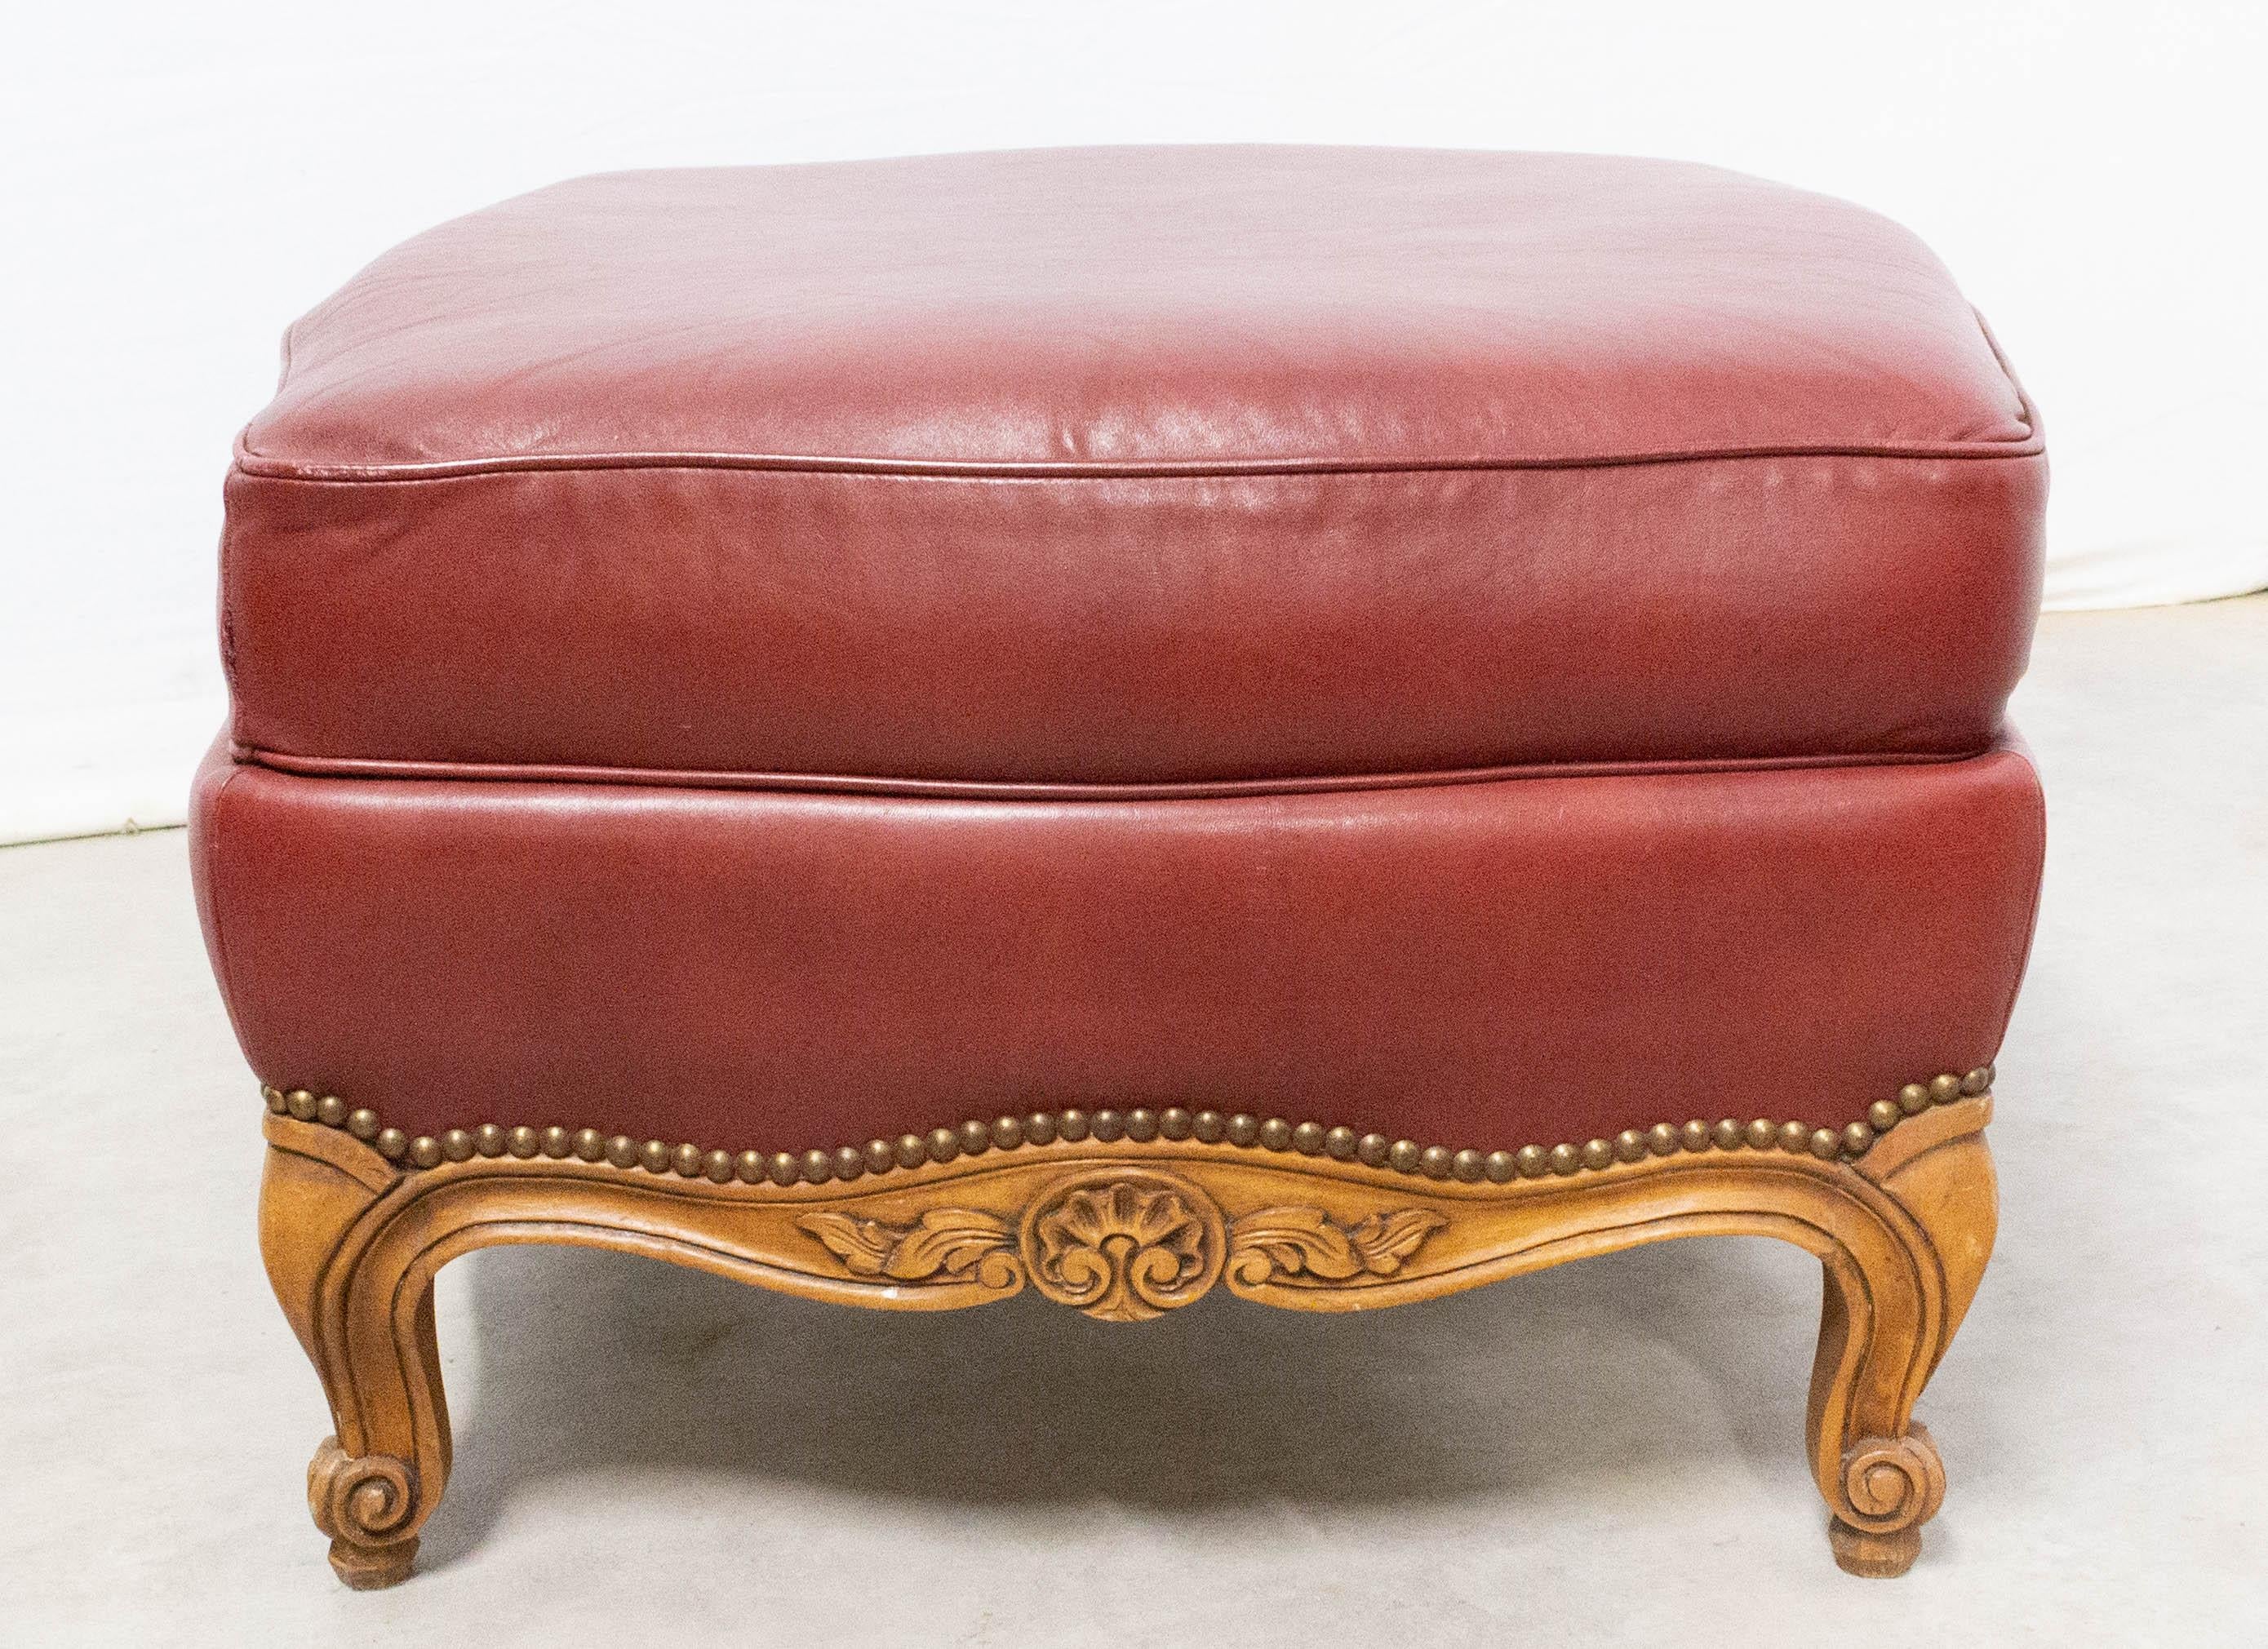 Pouf or ottoman, Louis XV style beech and red skai 
Good condition with minor marks of use
French midcentury


Shipping:
39/57/57 cm 13 kg.